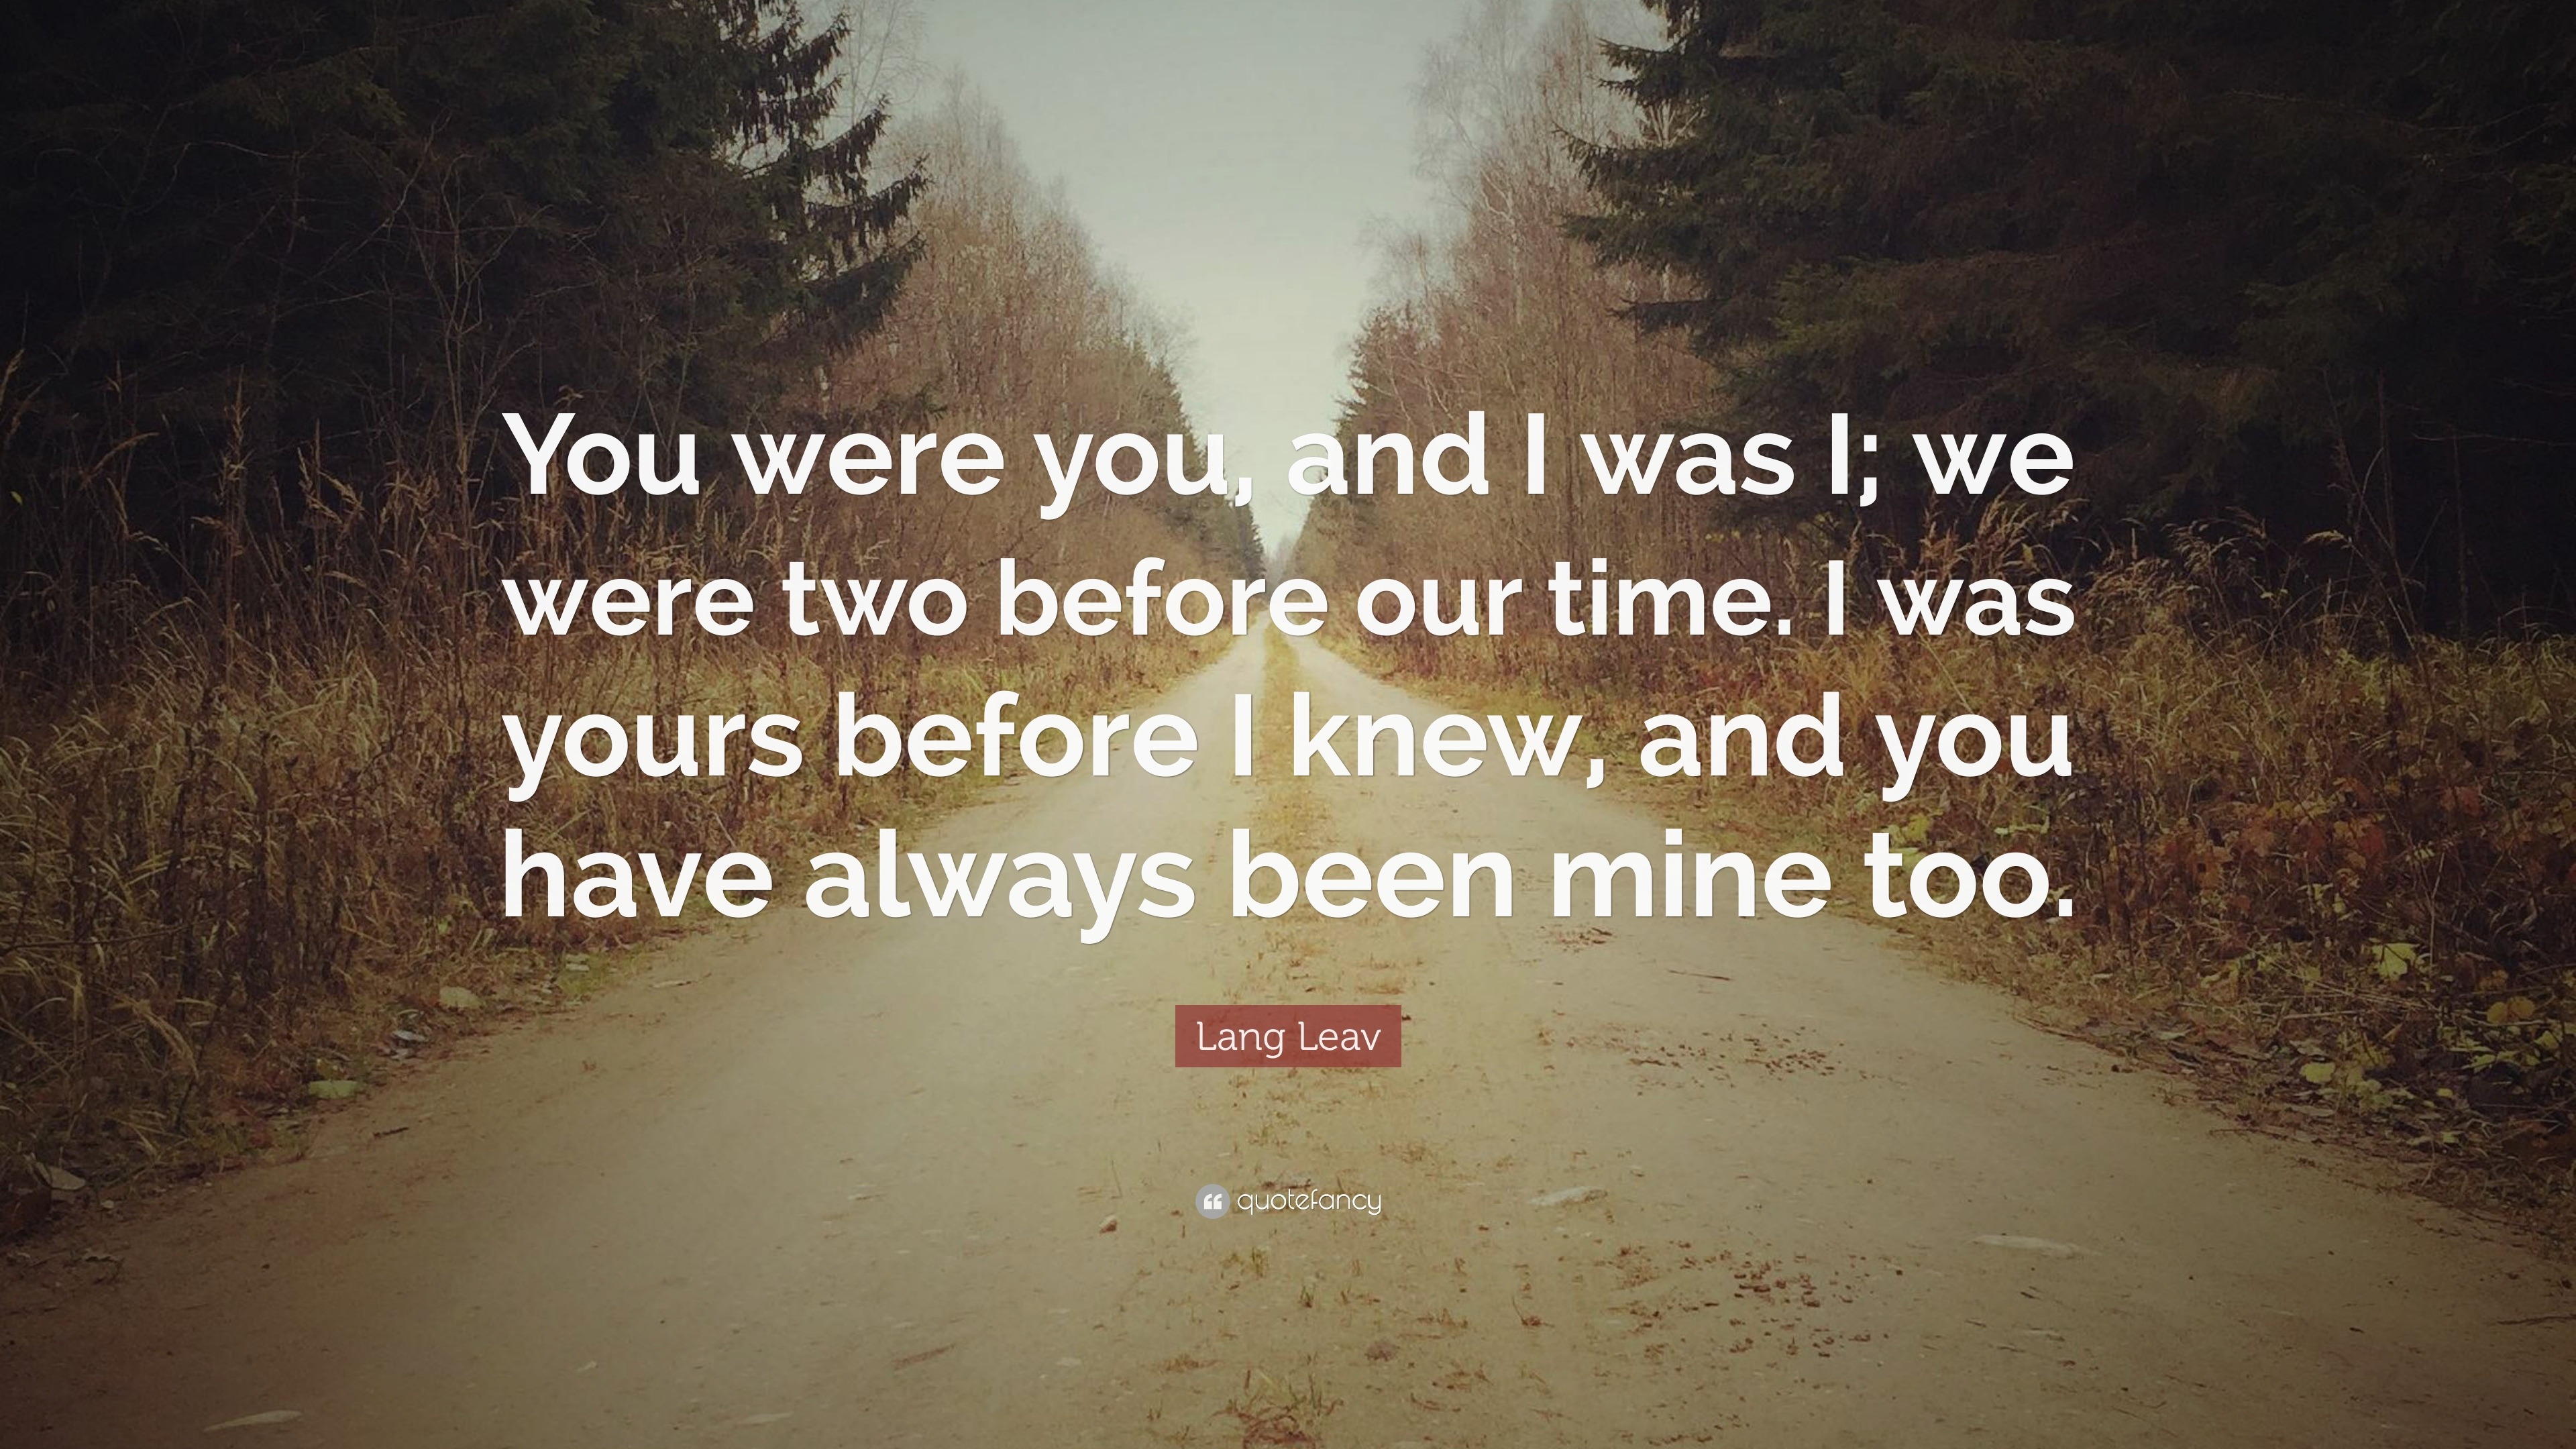 Lang Leav Quote: “You were you, and I was I; we two before our time.